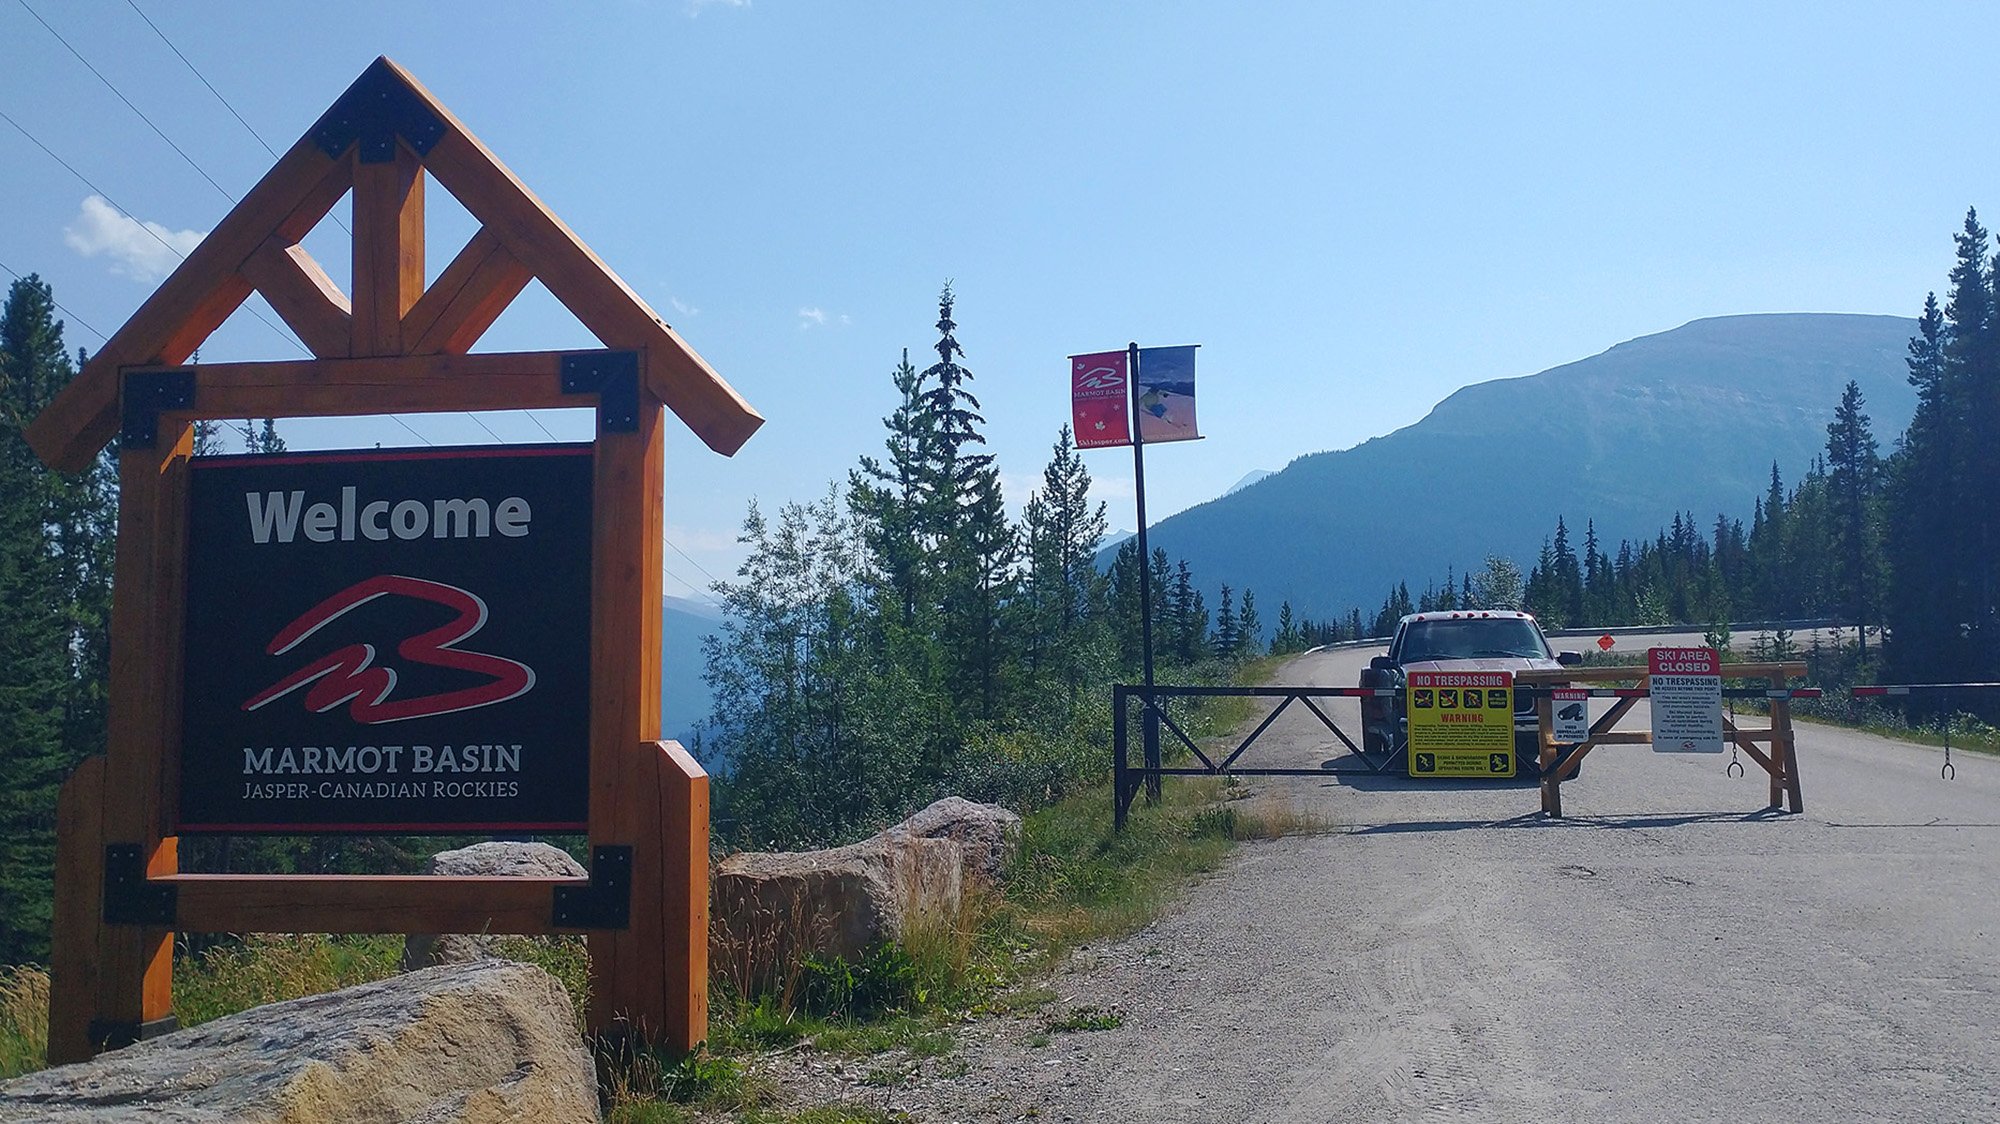 Next up: 600m climb up to Marmot Basin. Will never know what was there since the gate was closed and some ranger in a pickup was watching. Whew sure saved my life bro.